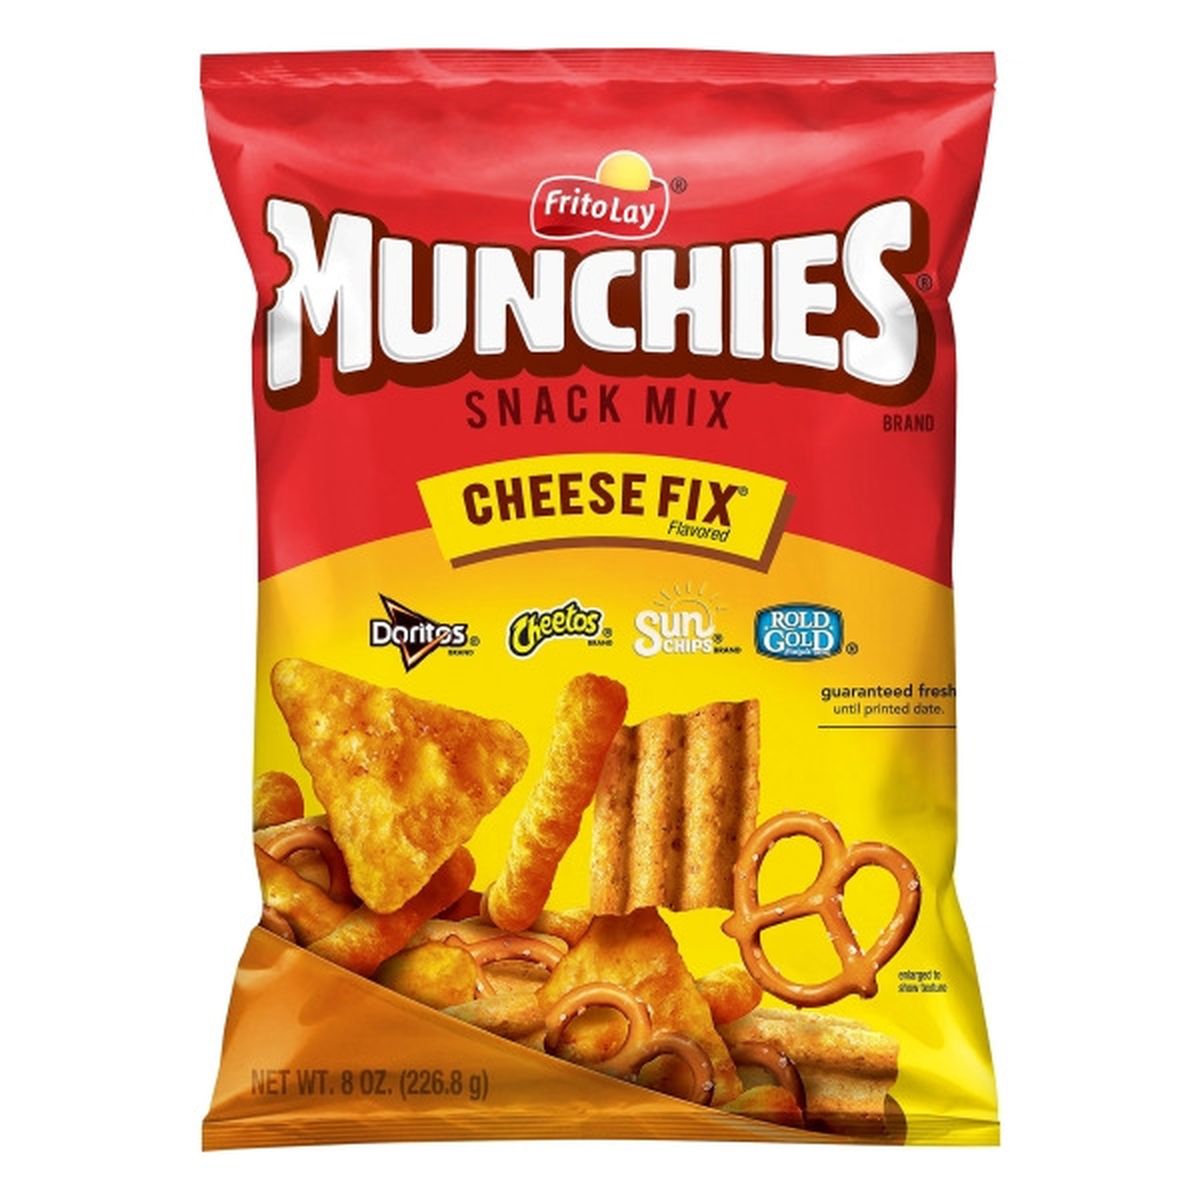 Calories in MUNCHIES Snack Mix, Cheese Fix Flavored